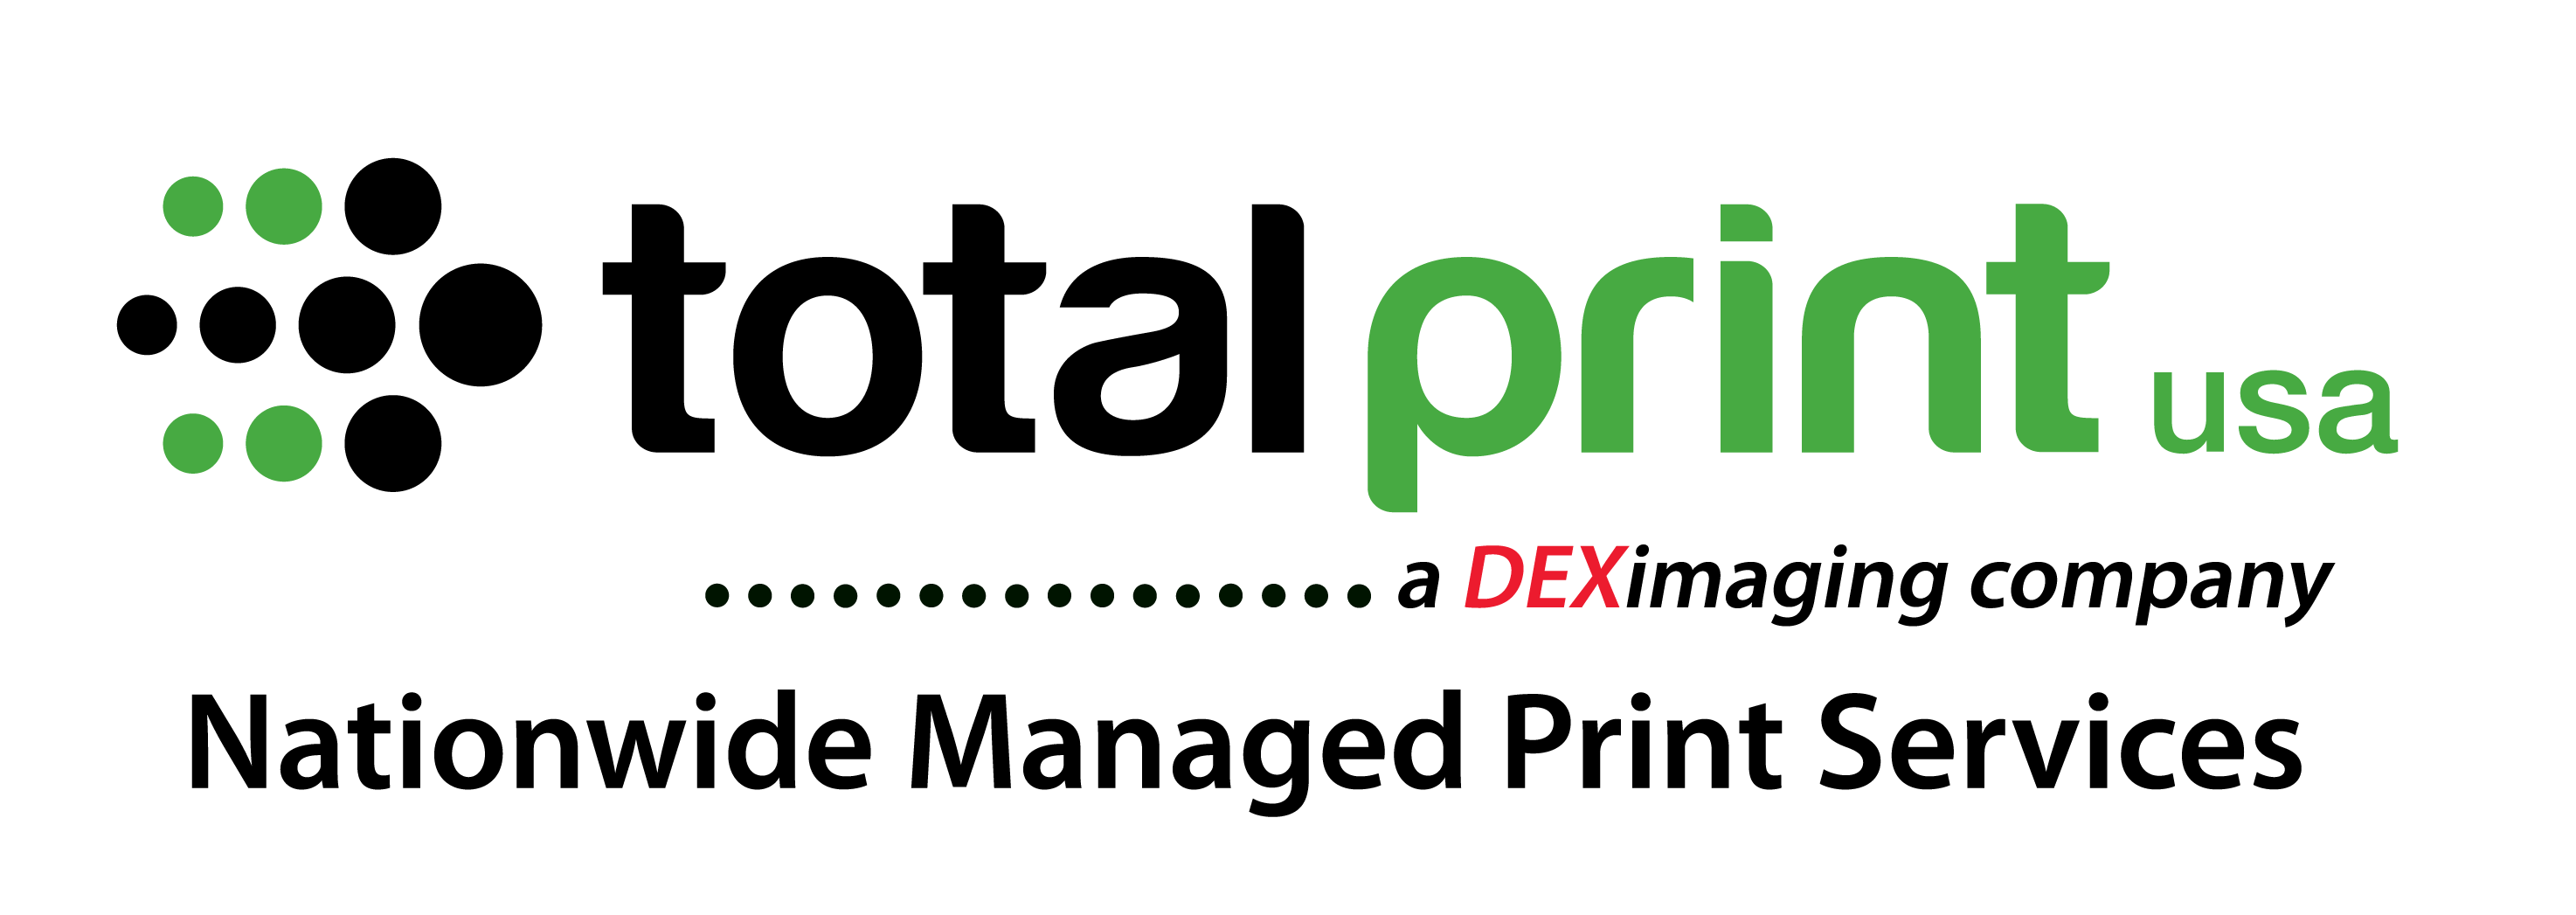 nationwide managed print services